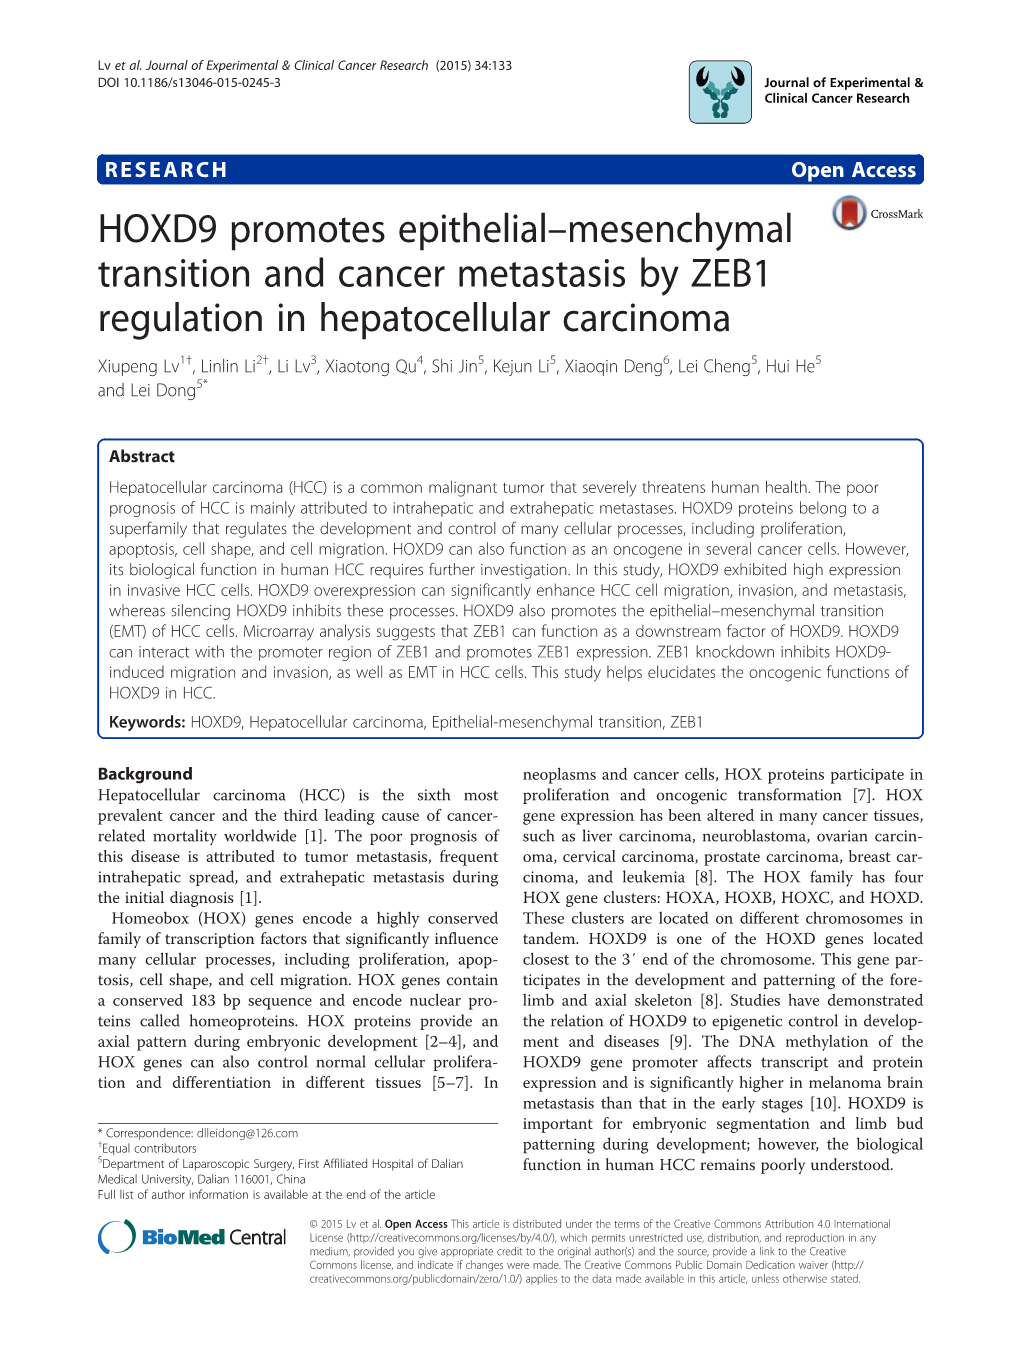 HOXD9 Promotes Epithelial–Mesenchymal Transition and Cancer Metastasis by ZEB1 Regulation in Hepatocellular Carcinoma